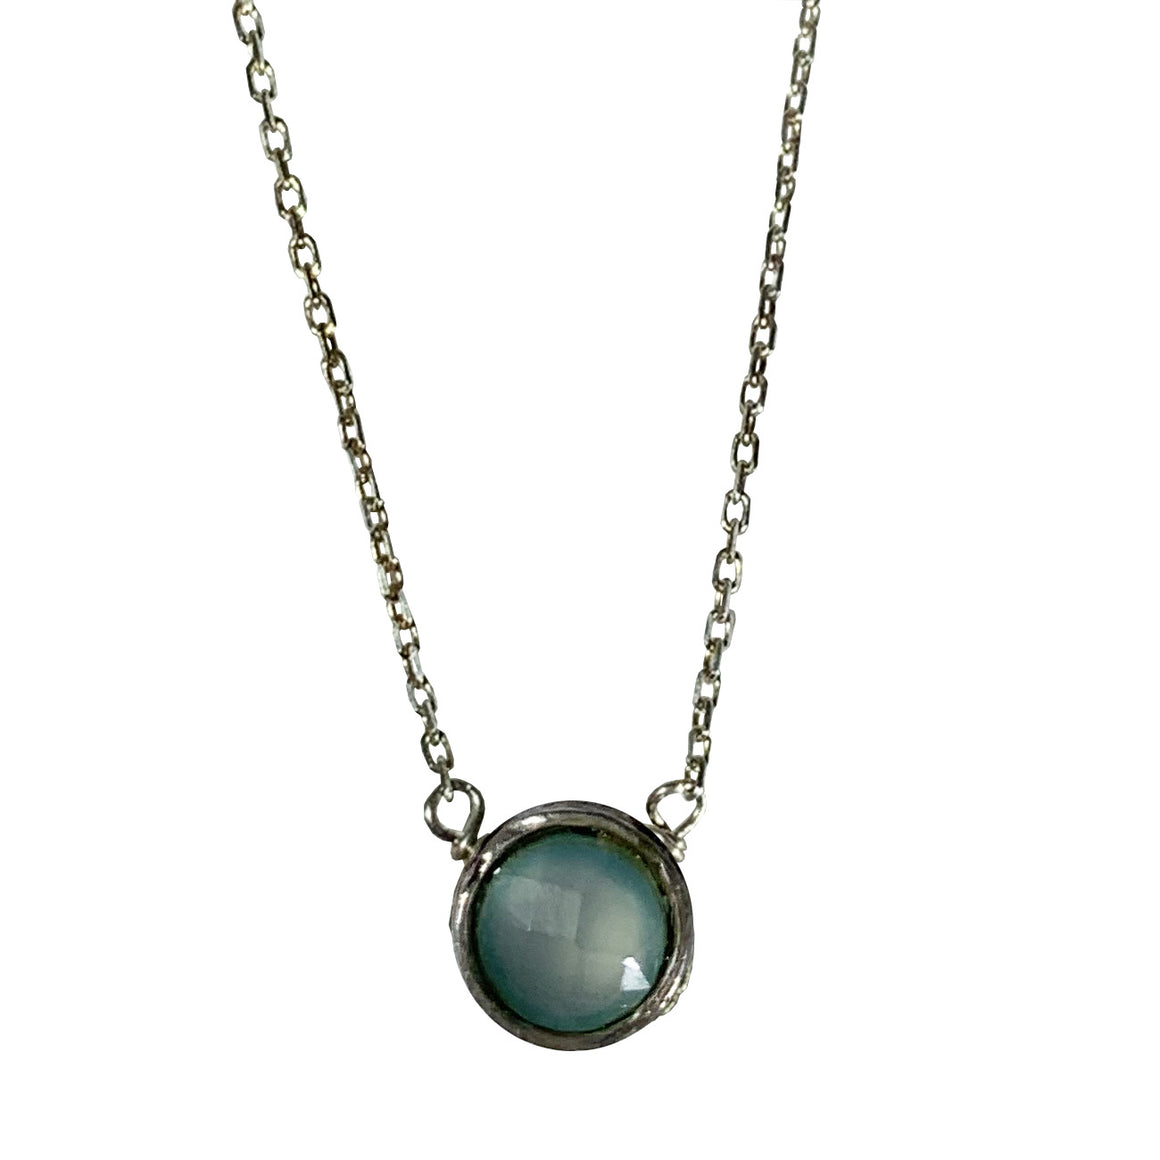 Aqua Chalcedony and Sterling Pixie Necklace